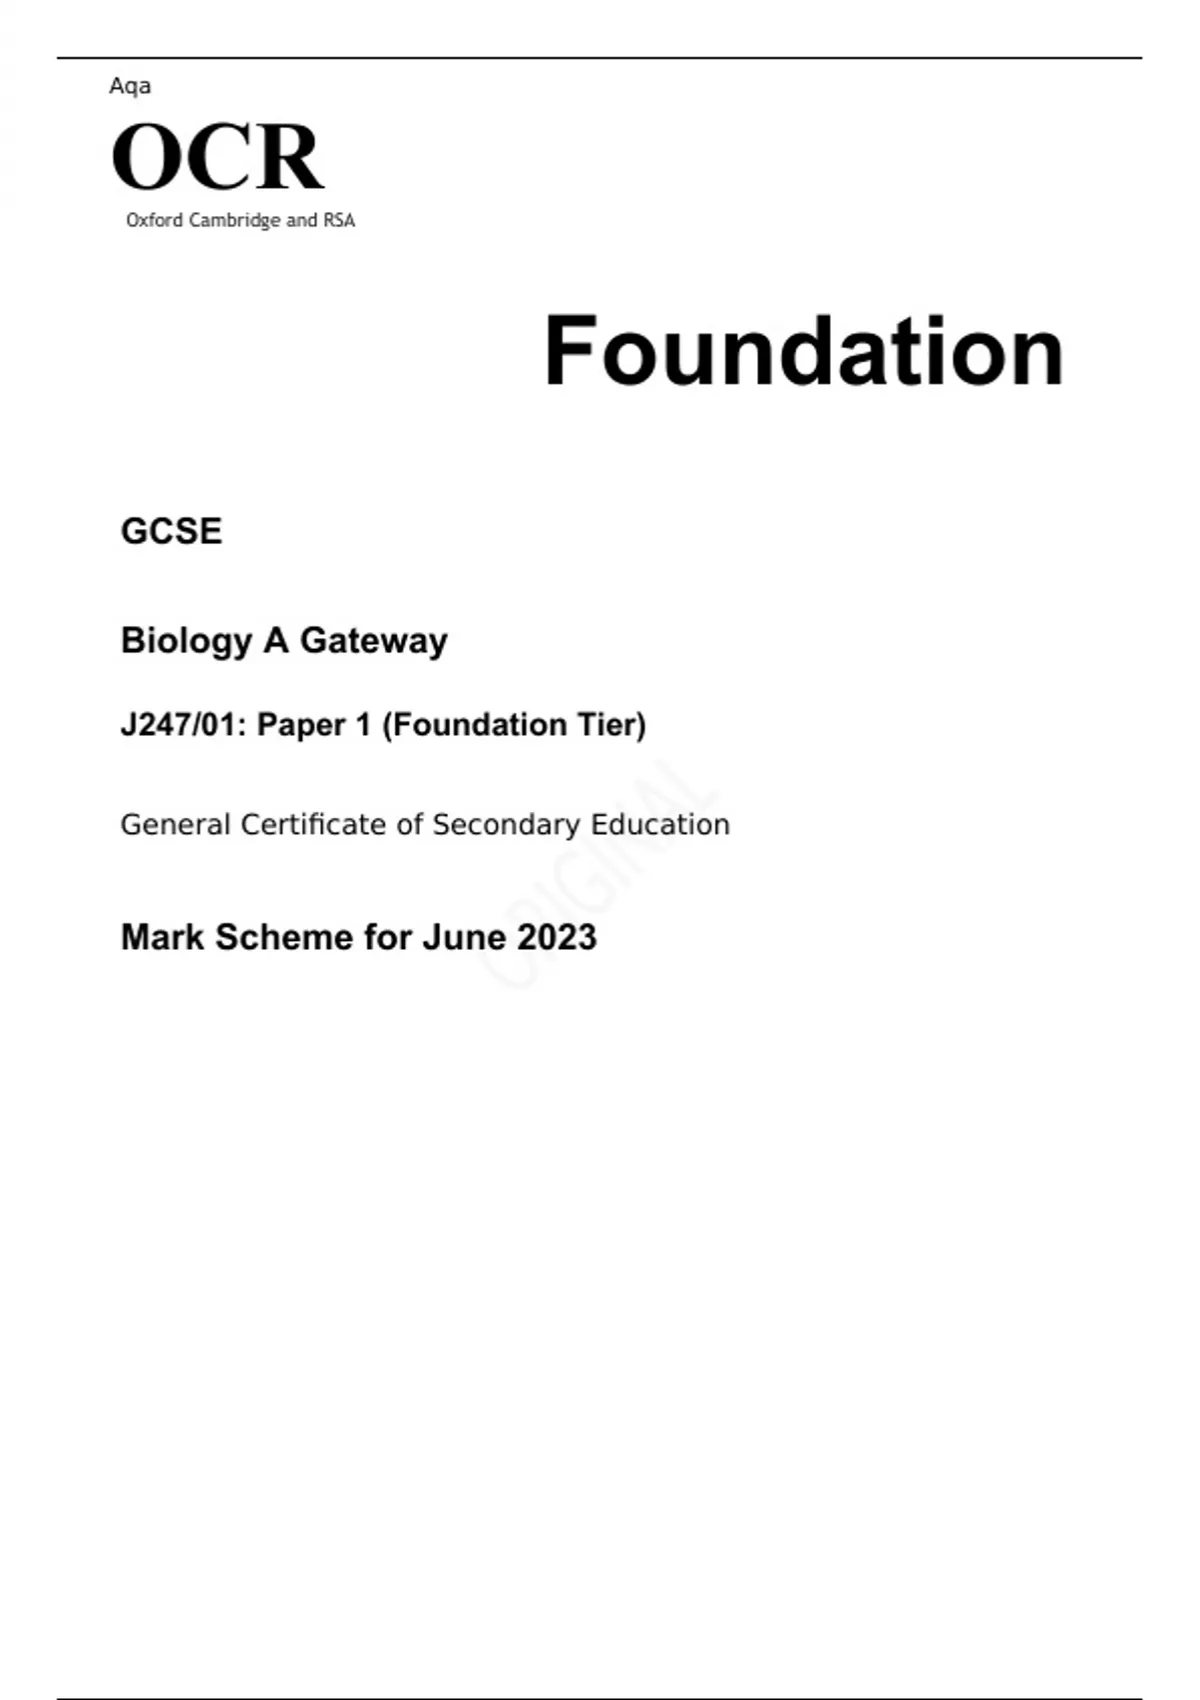 Foundation tier or Higher tier? Things to consider for GCSE (9-1